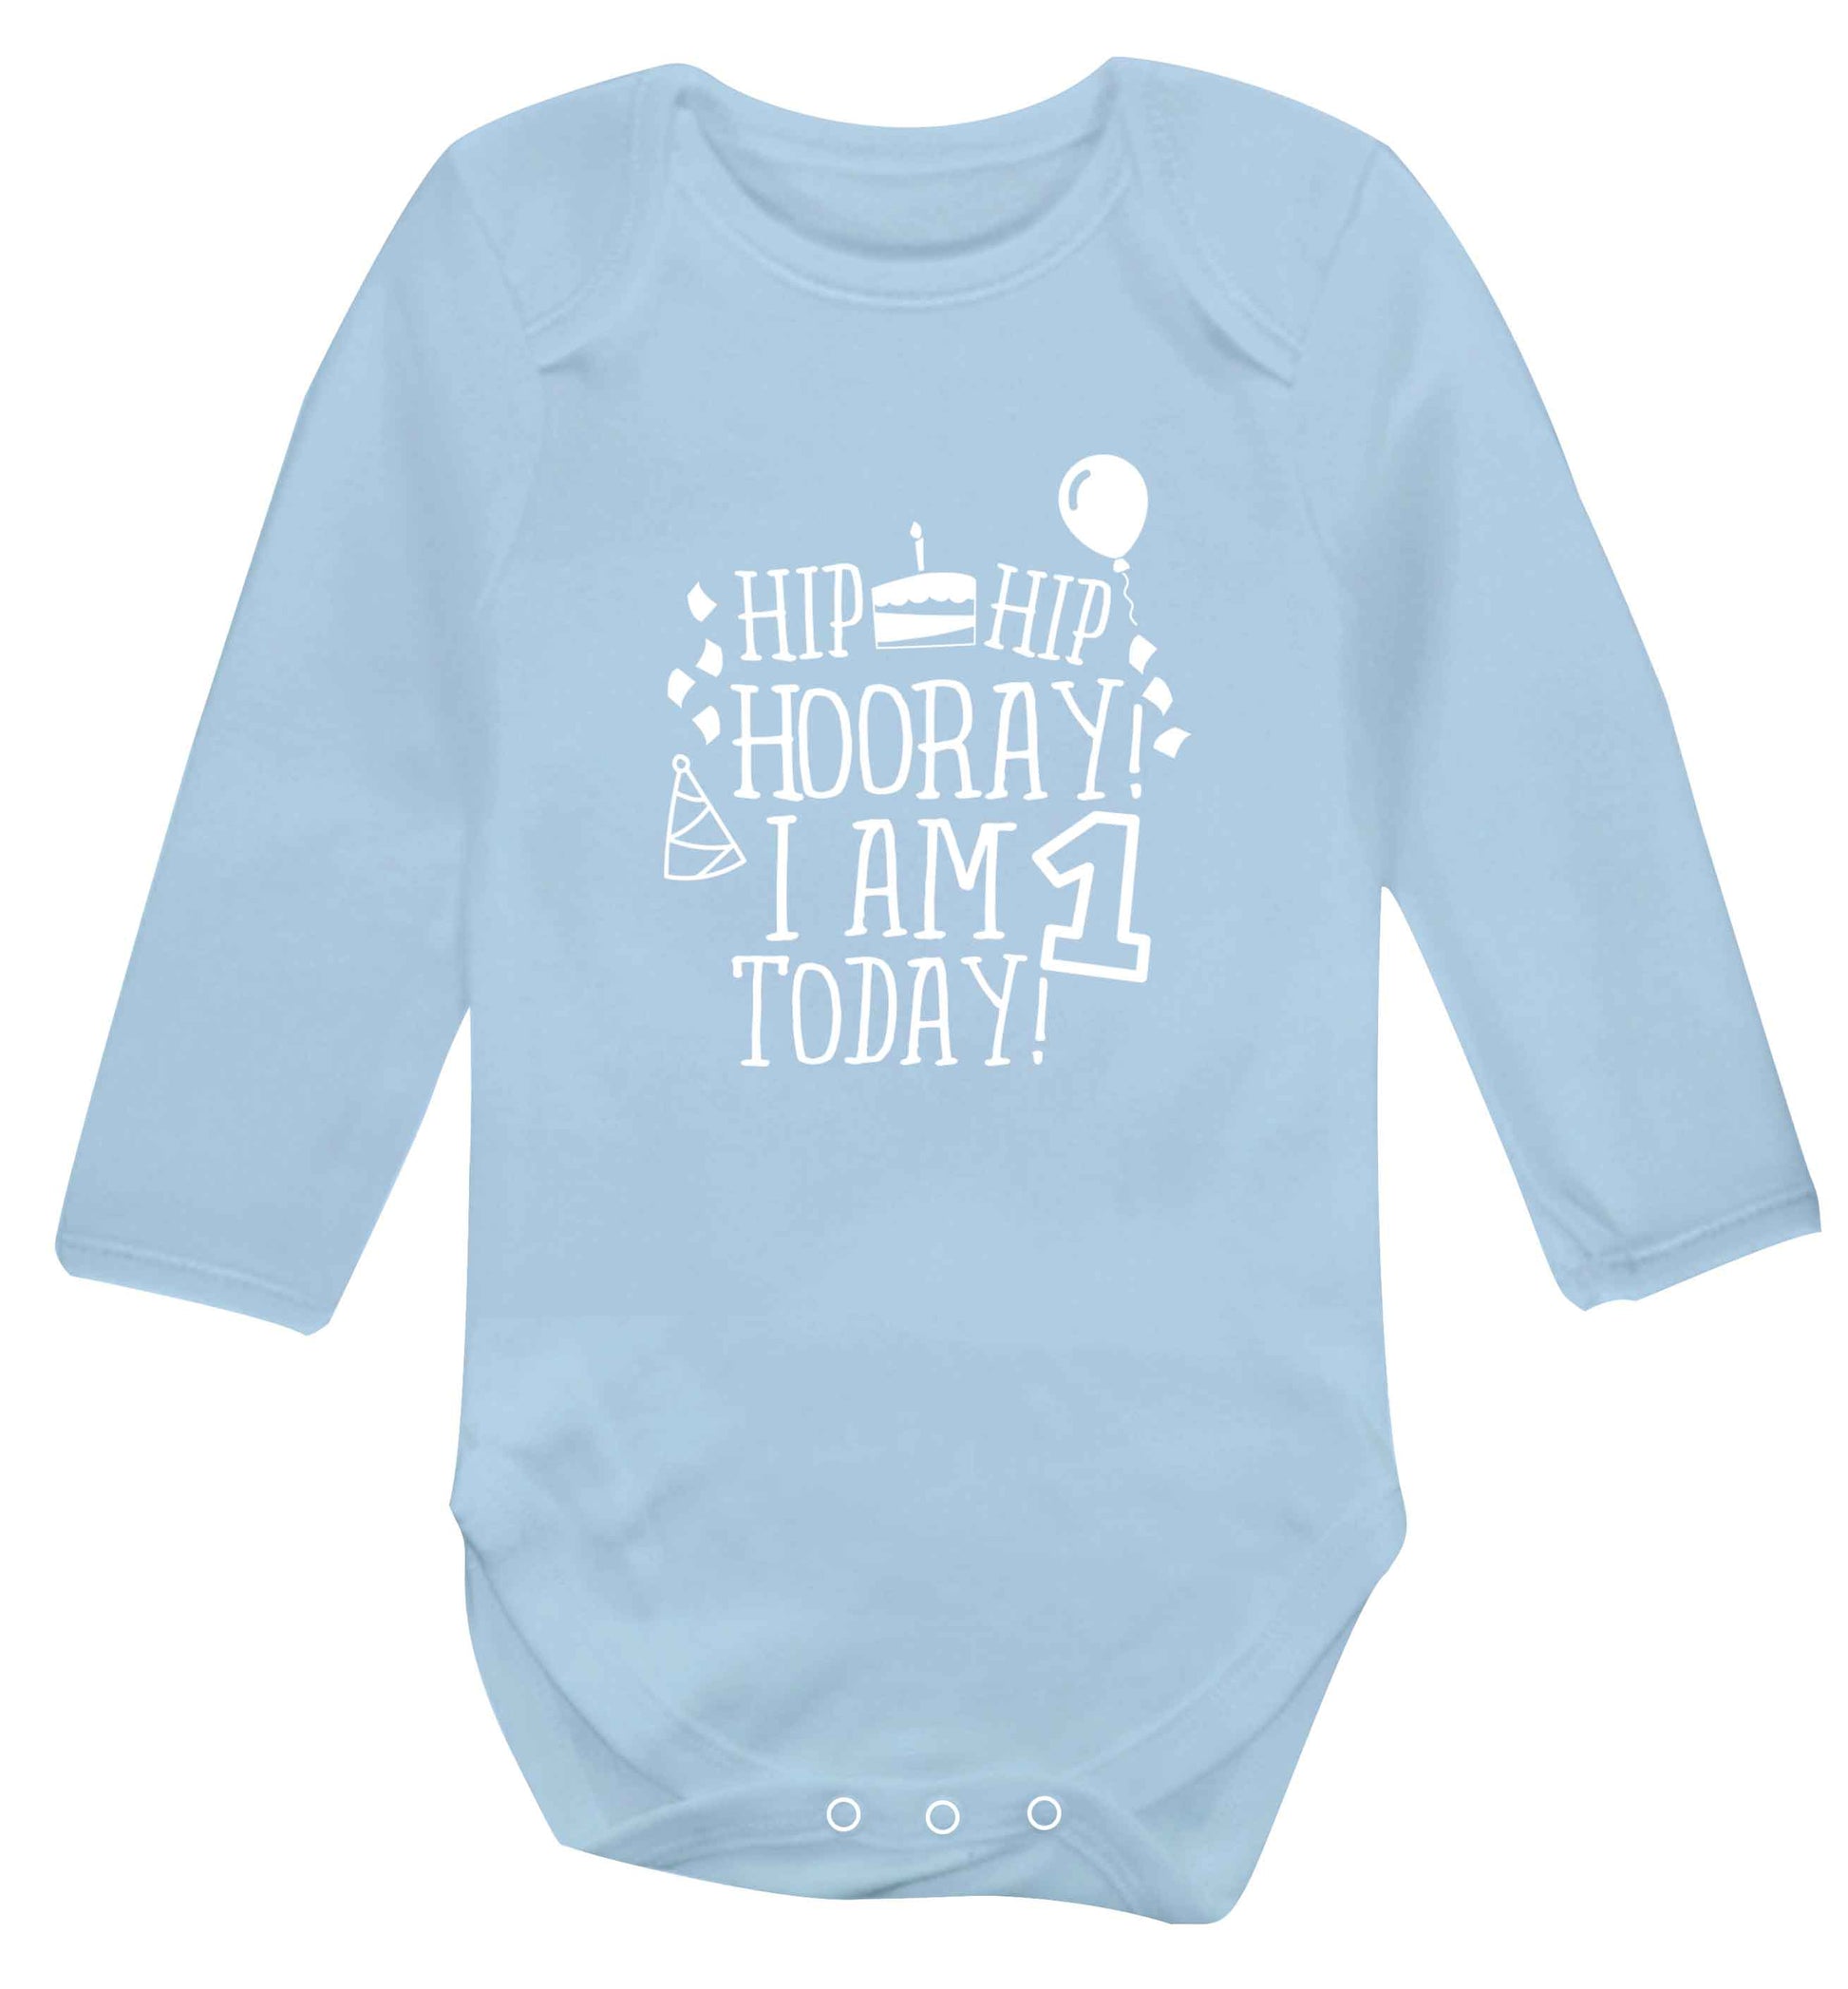 I am One Today baby vest long sleeved pale blue 6-12 months